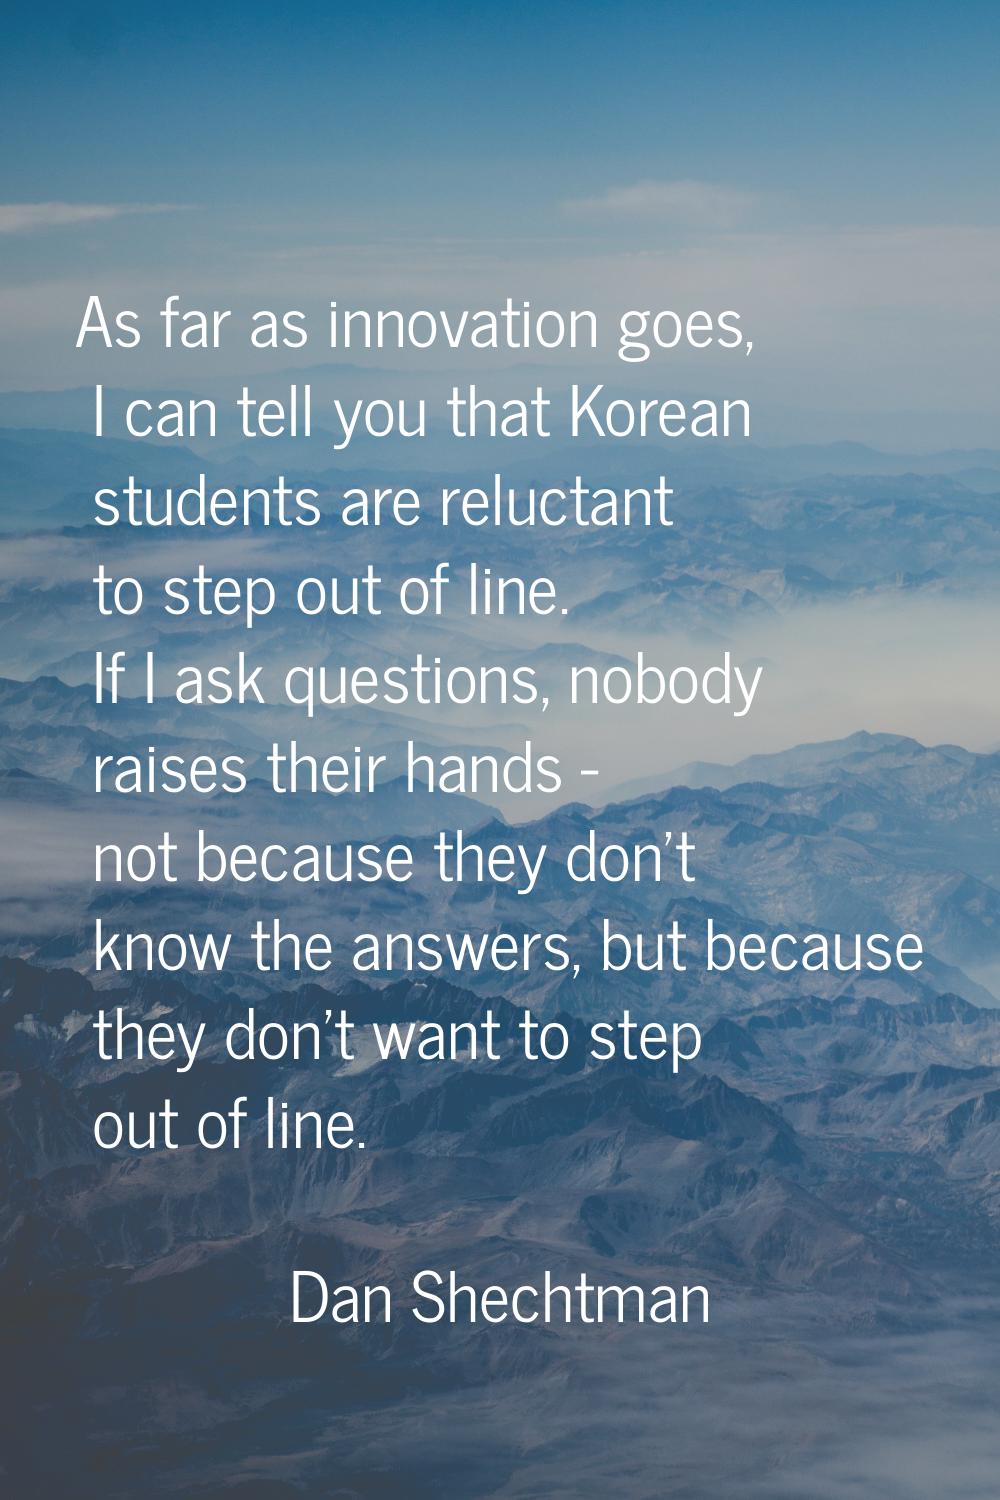 As far as innovation goes, I can tell you that Korean students are reluctant to step out of line. I